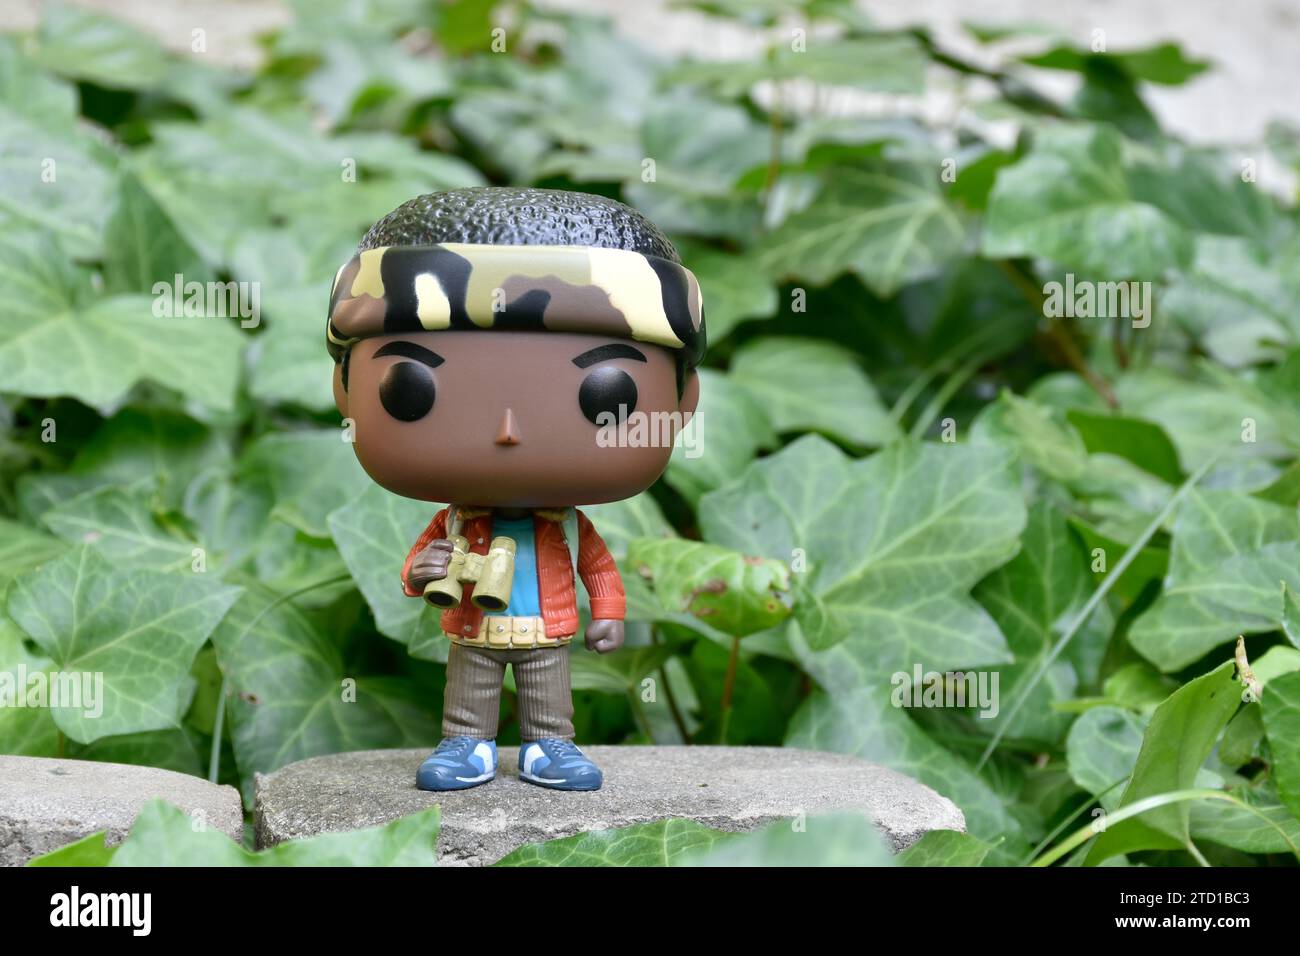 Funko Pop action figure of Lucas Sinclair with binoculars from Netflix TV series Stranger Things. Green ivy plant leaves, abandoned garden, spying. Stock Photo